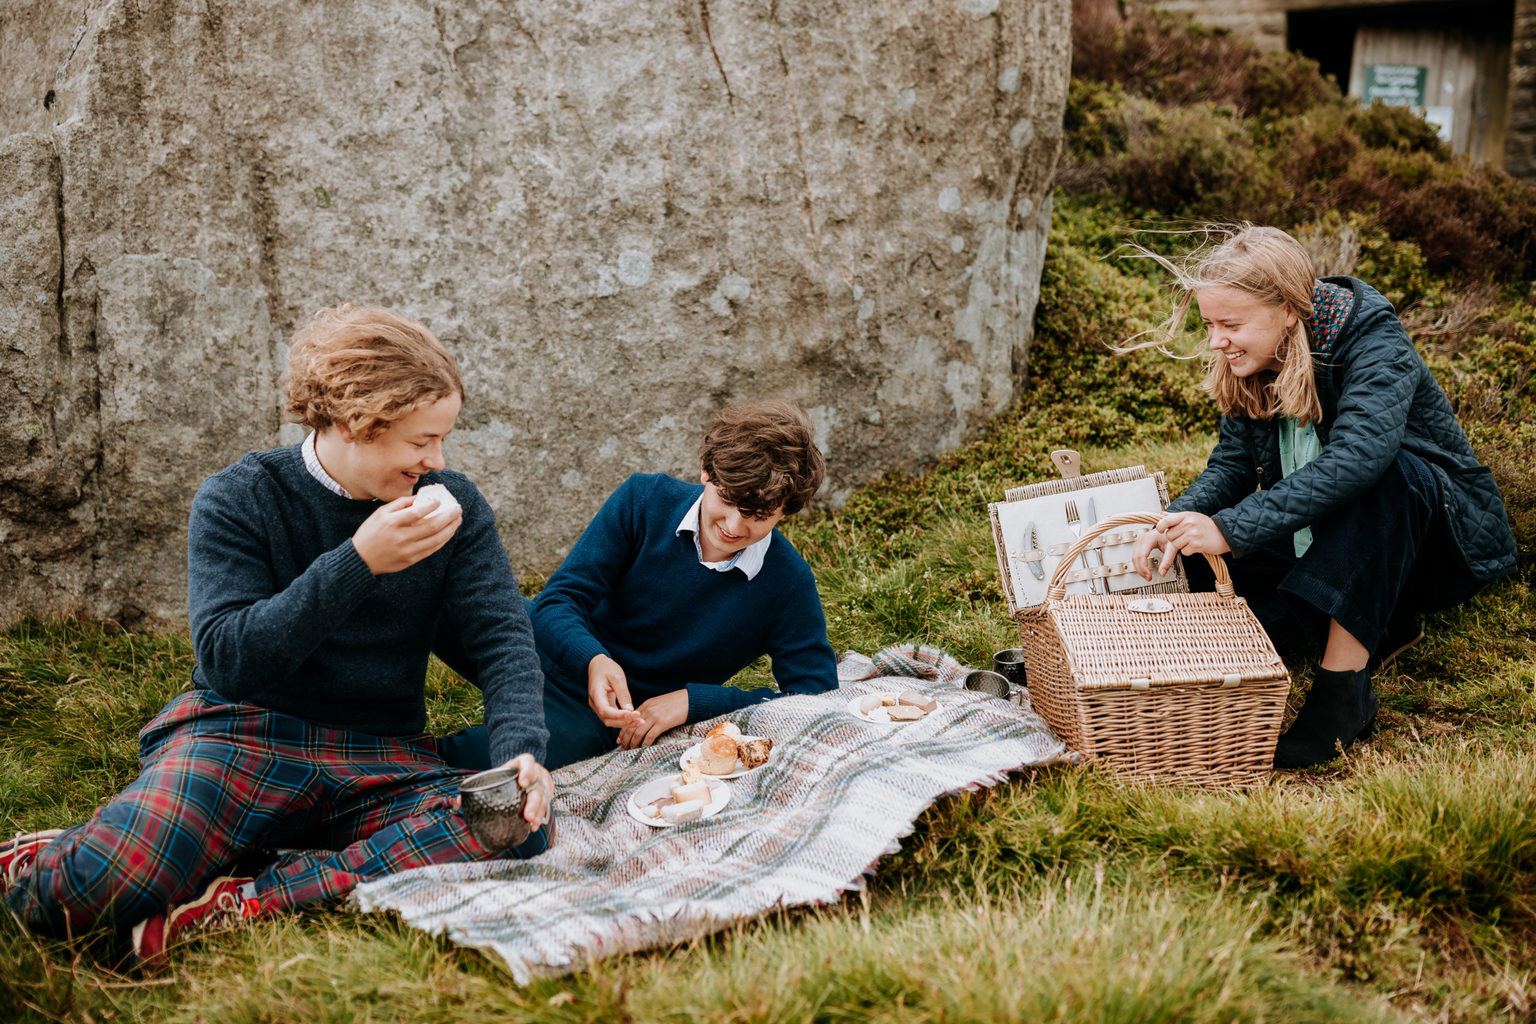 Three teenagers having a picnic outdoors on grass on the Swinton Estate in North Yorkshire.